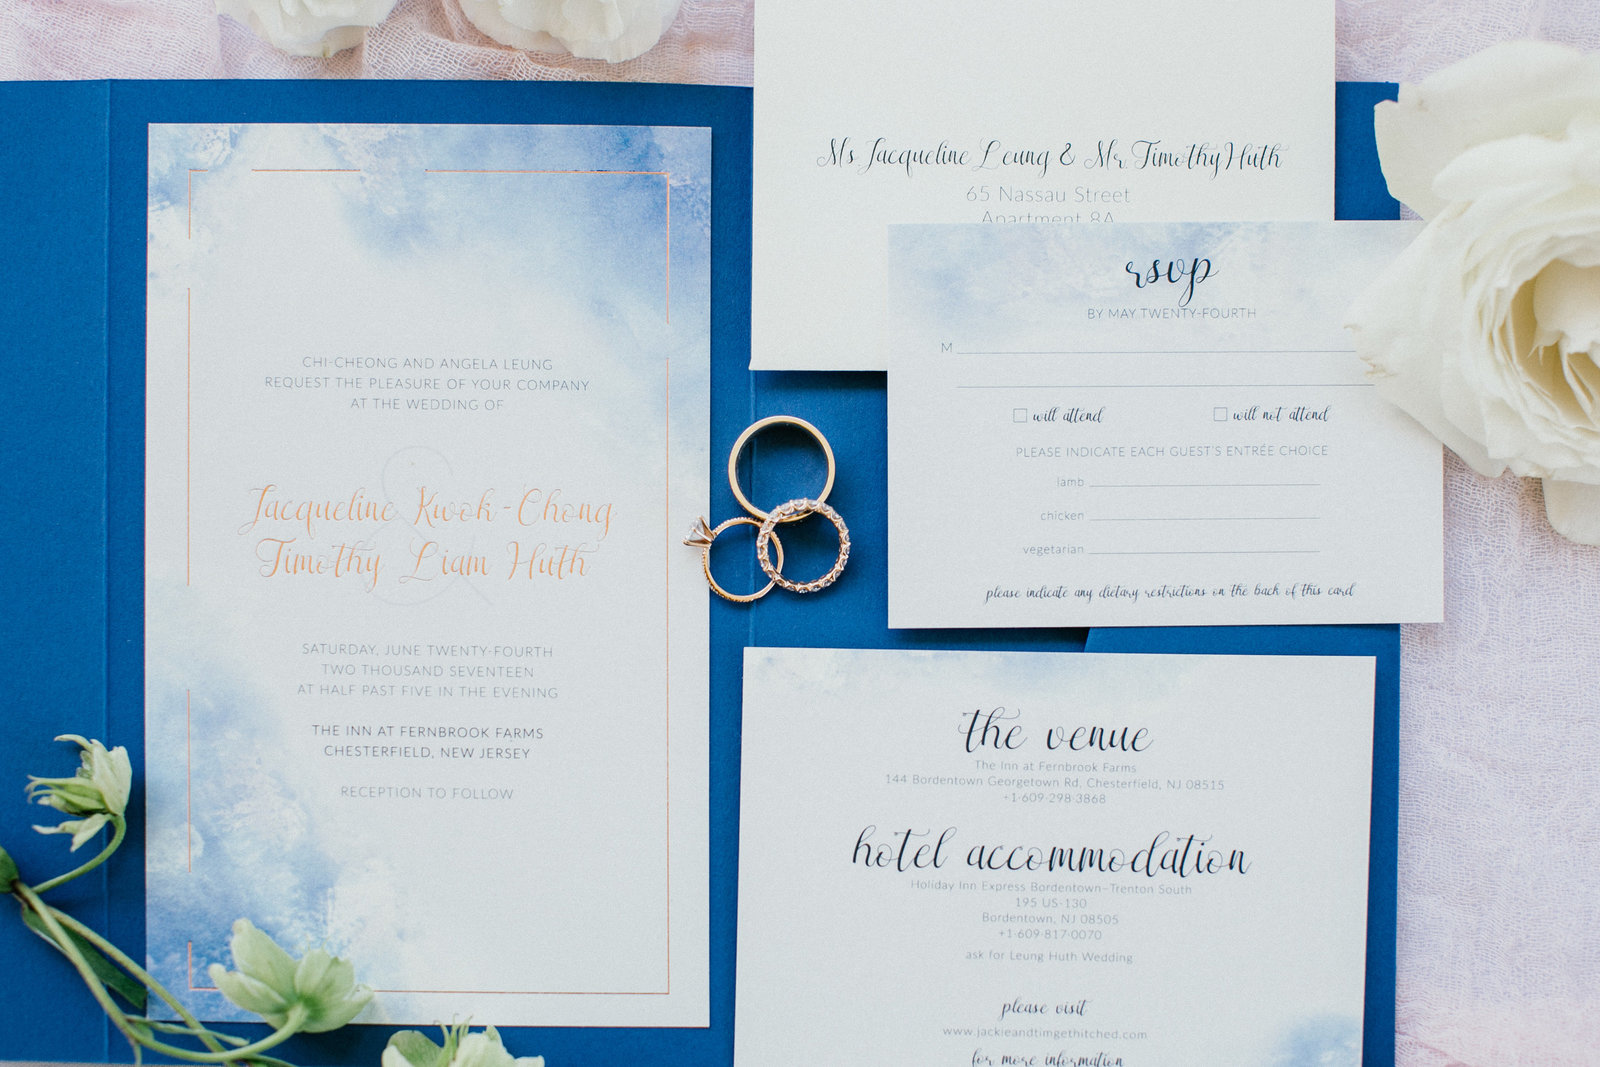 Beautiful invitation suite with bright blue accents.